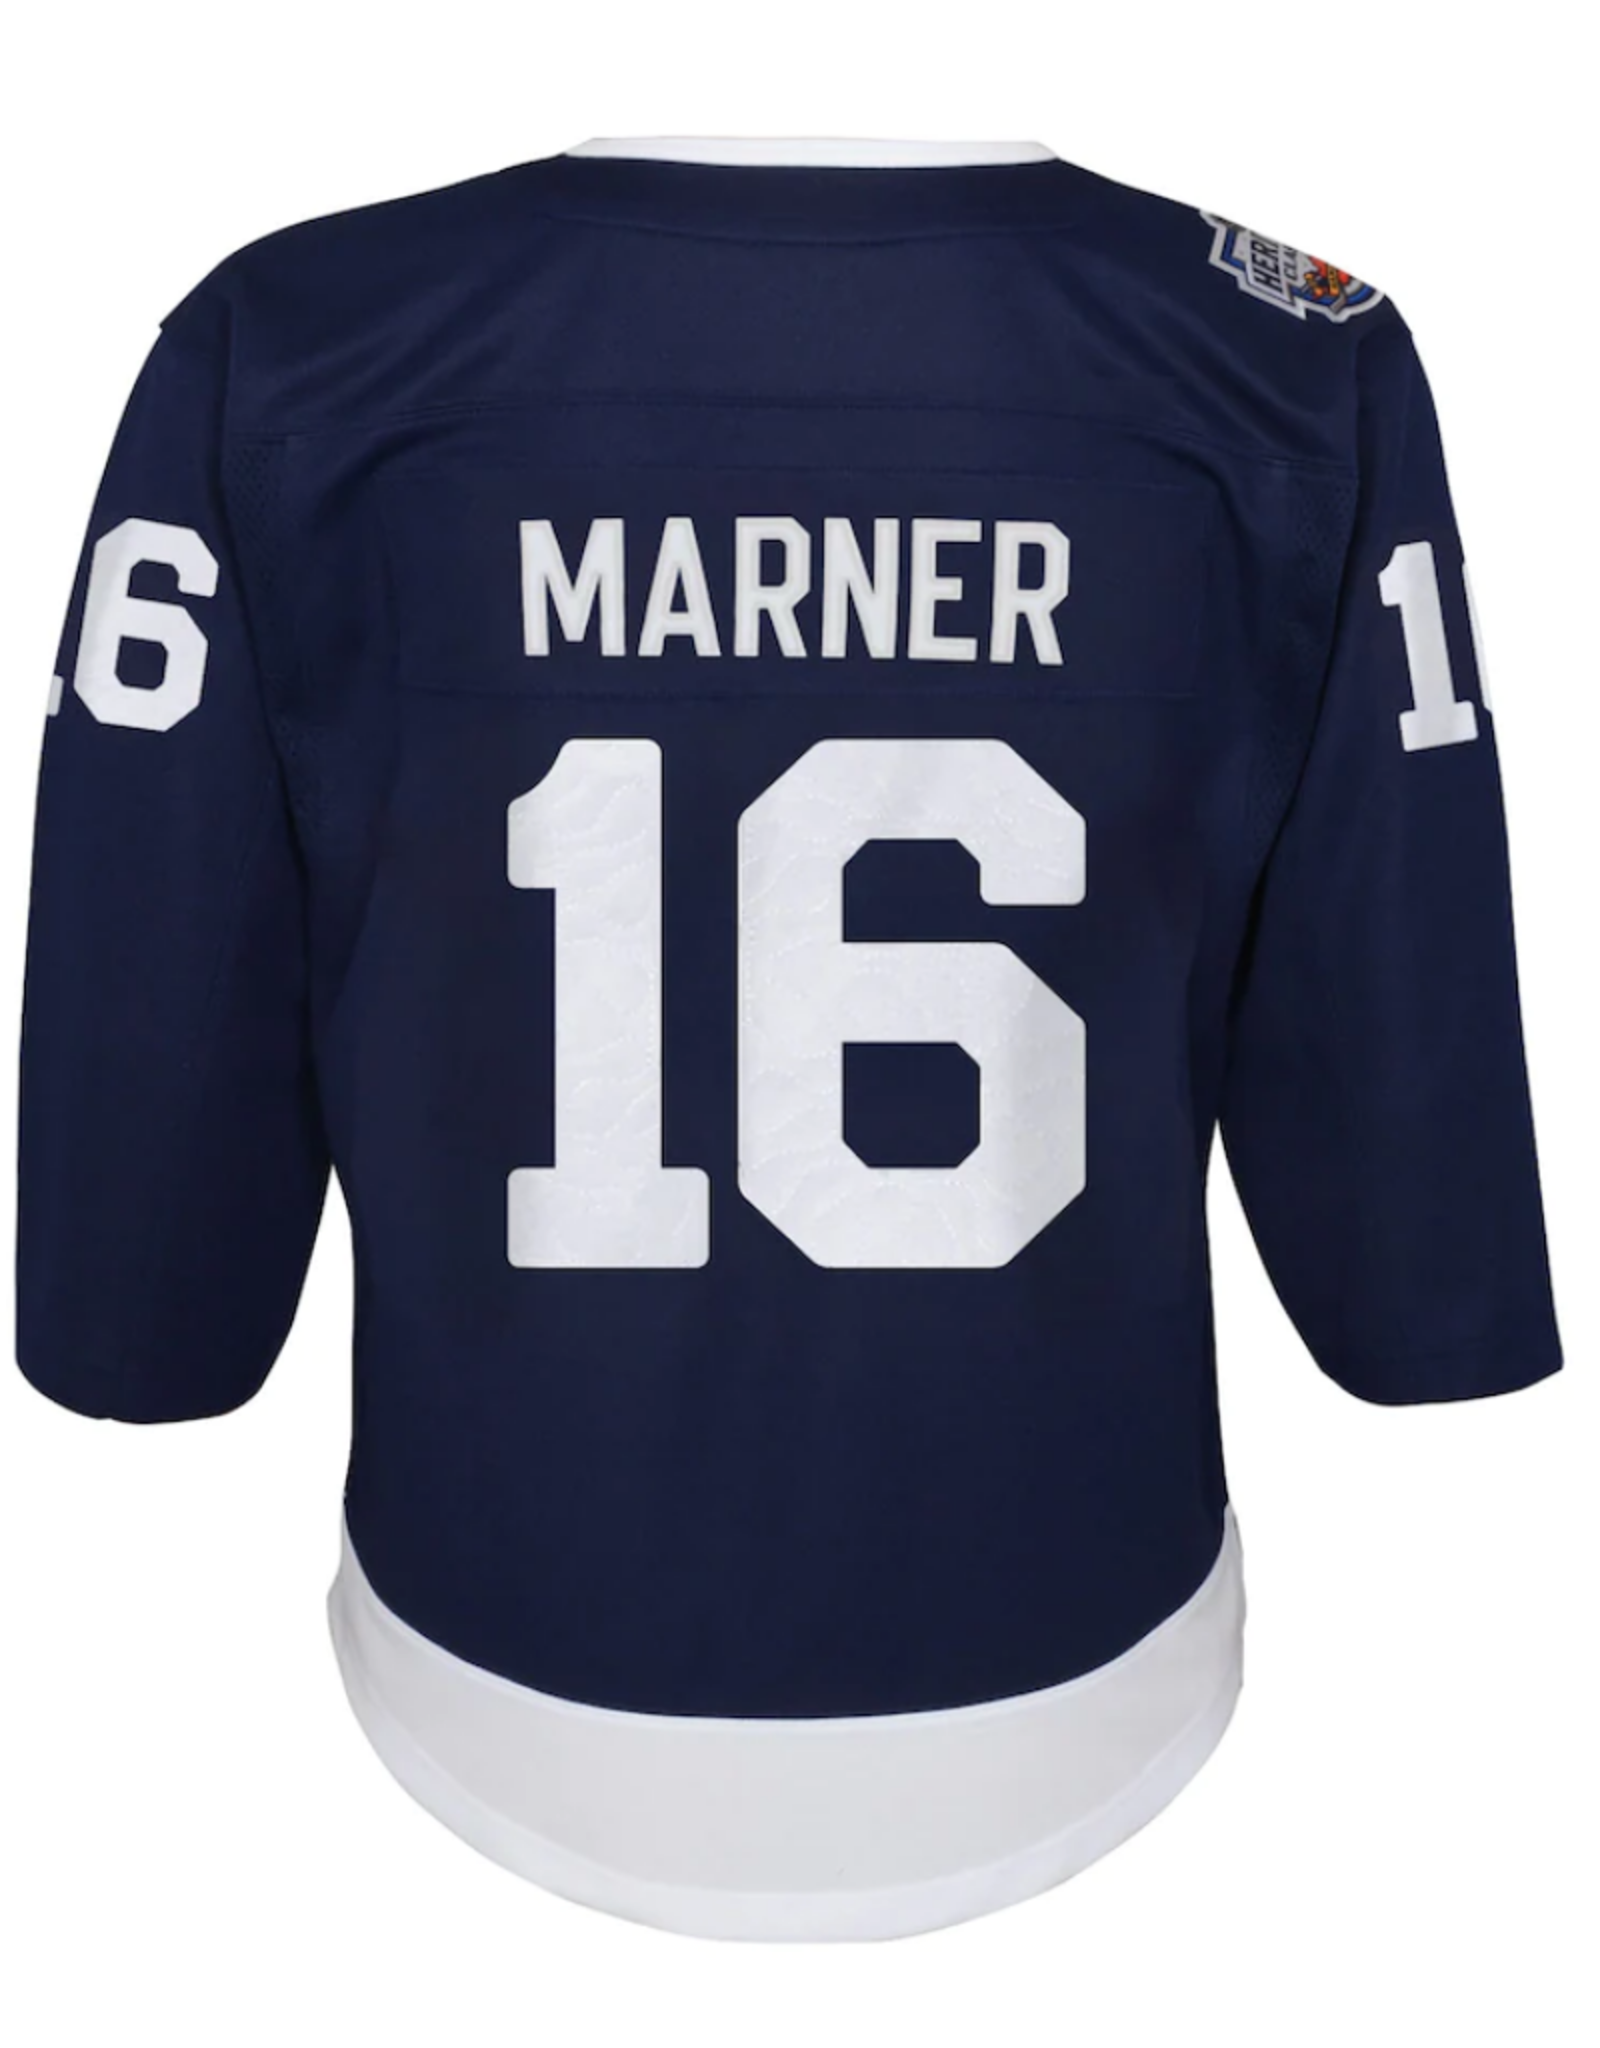 Outerstuff Youth Heritage Classic Marner #16 Jersey Toronto Maple Leafs